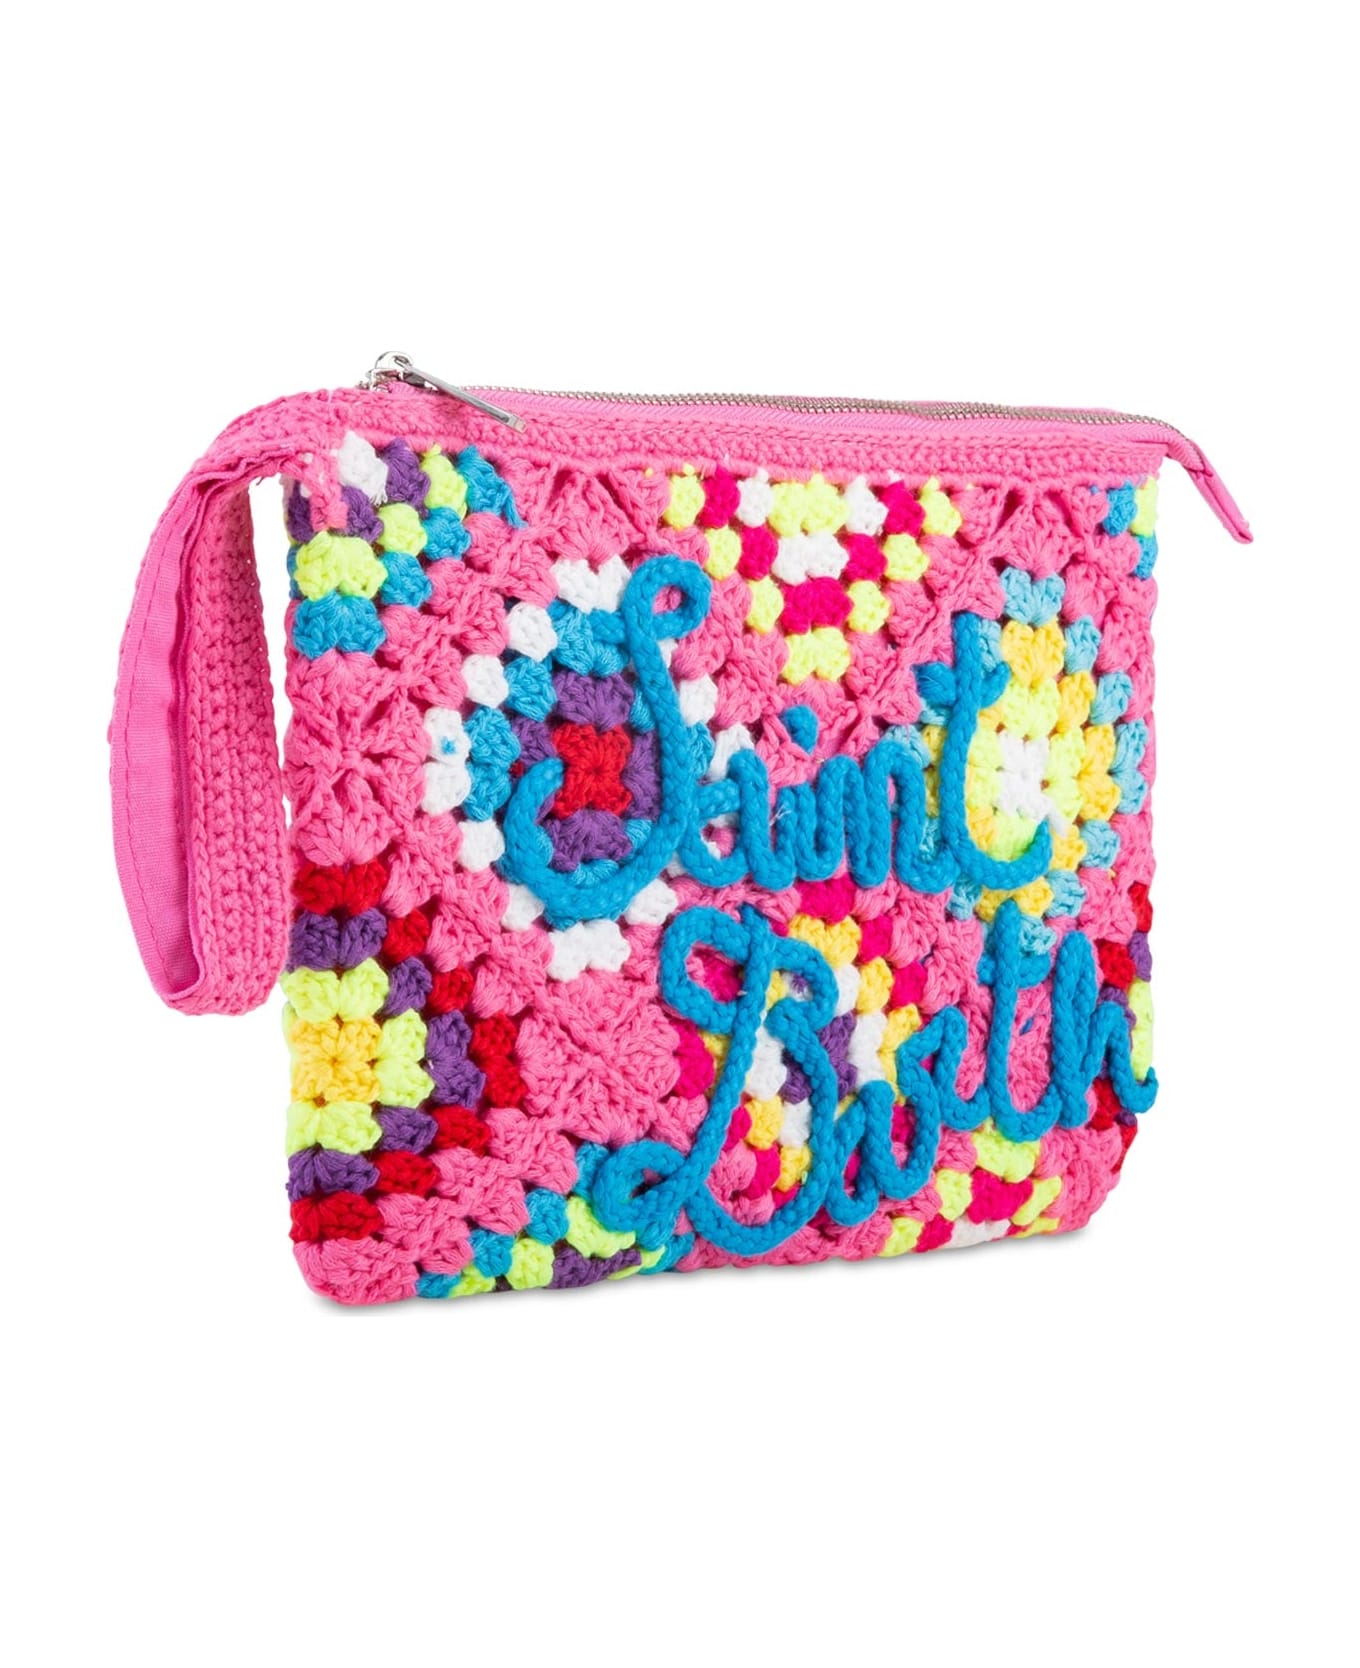 MC2 Saint Barth Parisienne Pink Crochet Pouch Bag With Saint Barth Embroidery - PINK